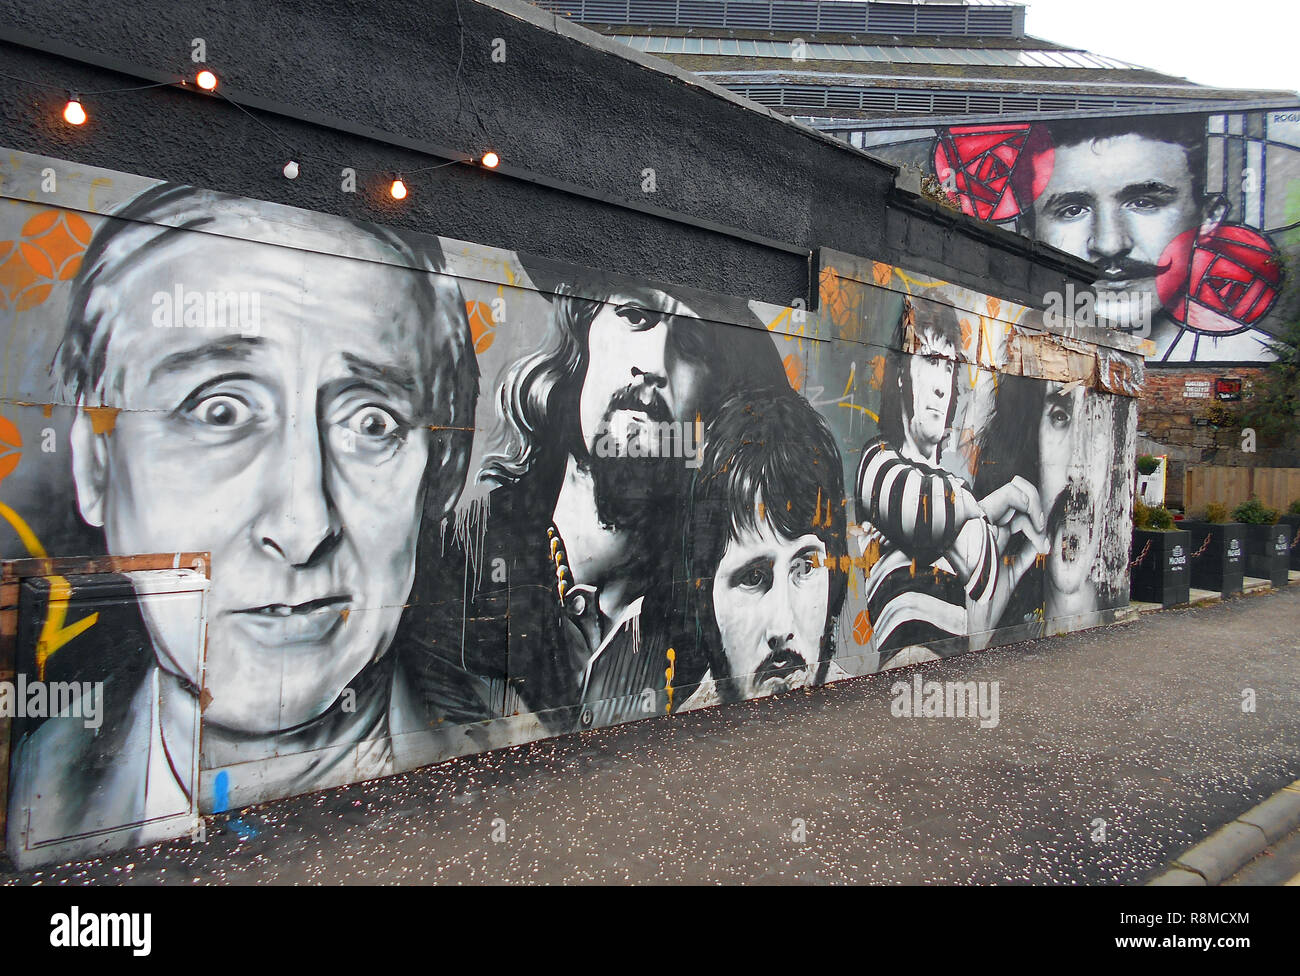 On the exterior wall of the Clutha Bar, next to the river Clyde in Glasgow, there are murals of well known people such as Spike Milligan, Sir Billy Connolly, Gerry Rafferty, Alex Harvey, Frank Zappa and the latest edition in 2018, the famous, and world renowned architect and designer, Charles Rennie Mackintosh. Alan Wylie/ALAMY© Stock Photo